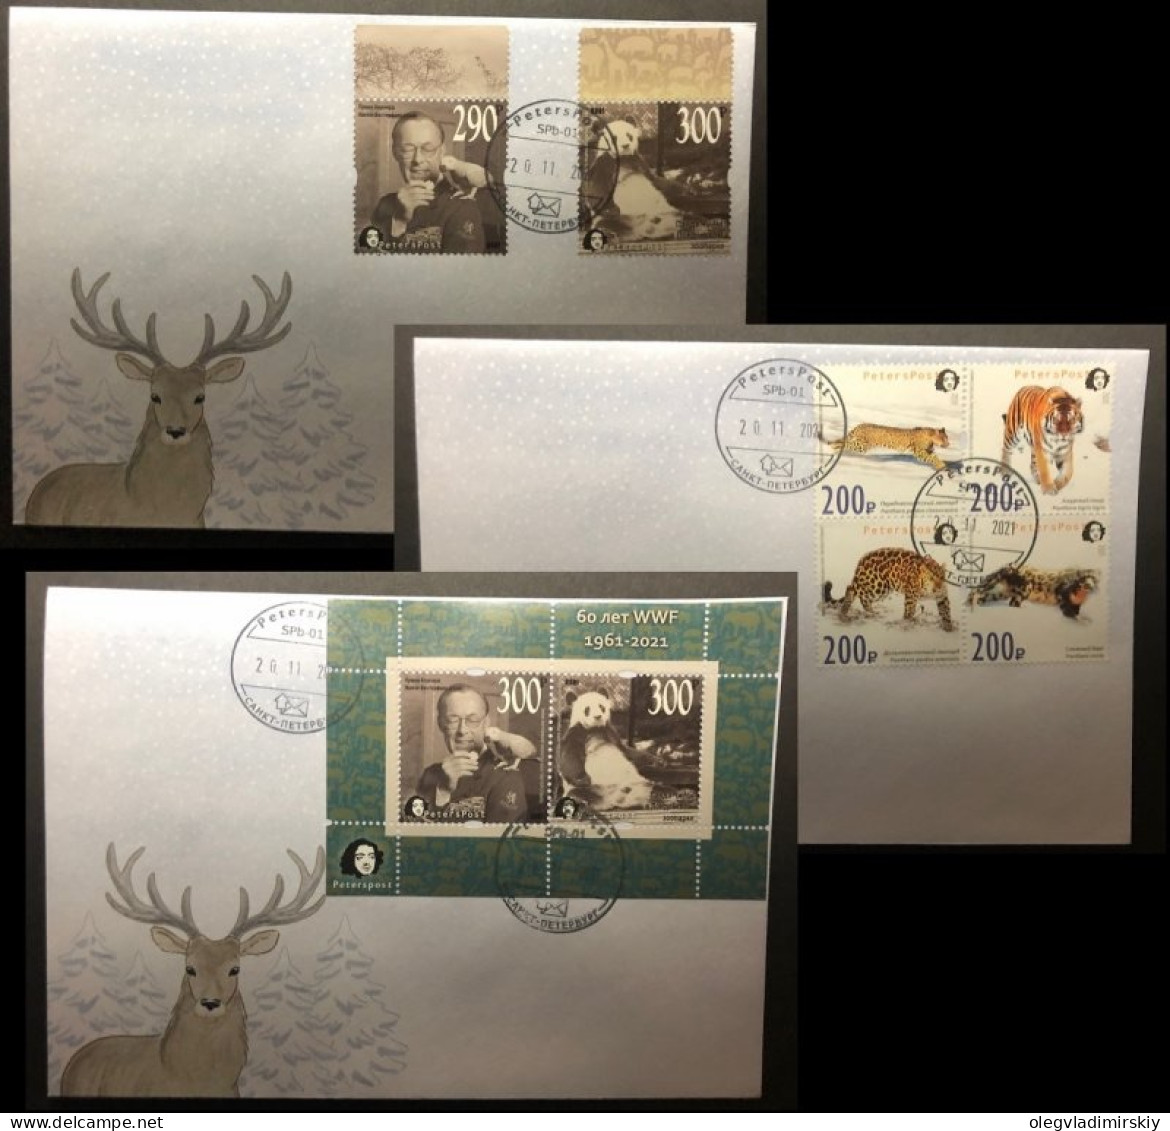 Russia 2021 60 Ann Of WWF 1961-2021 Peterspost Full Set Of 3 FDC's - FDC